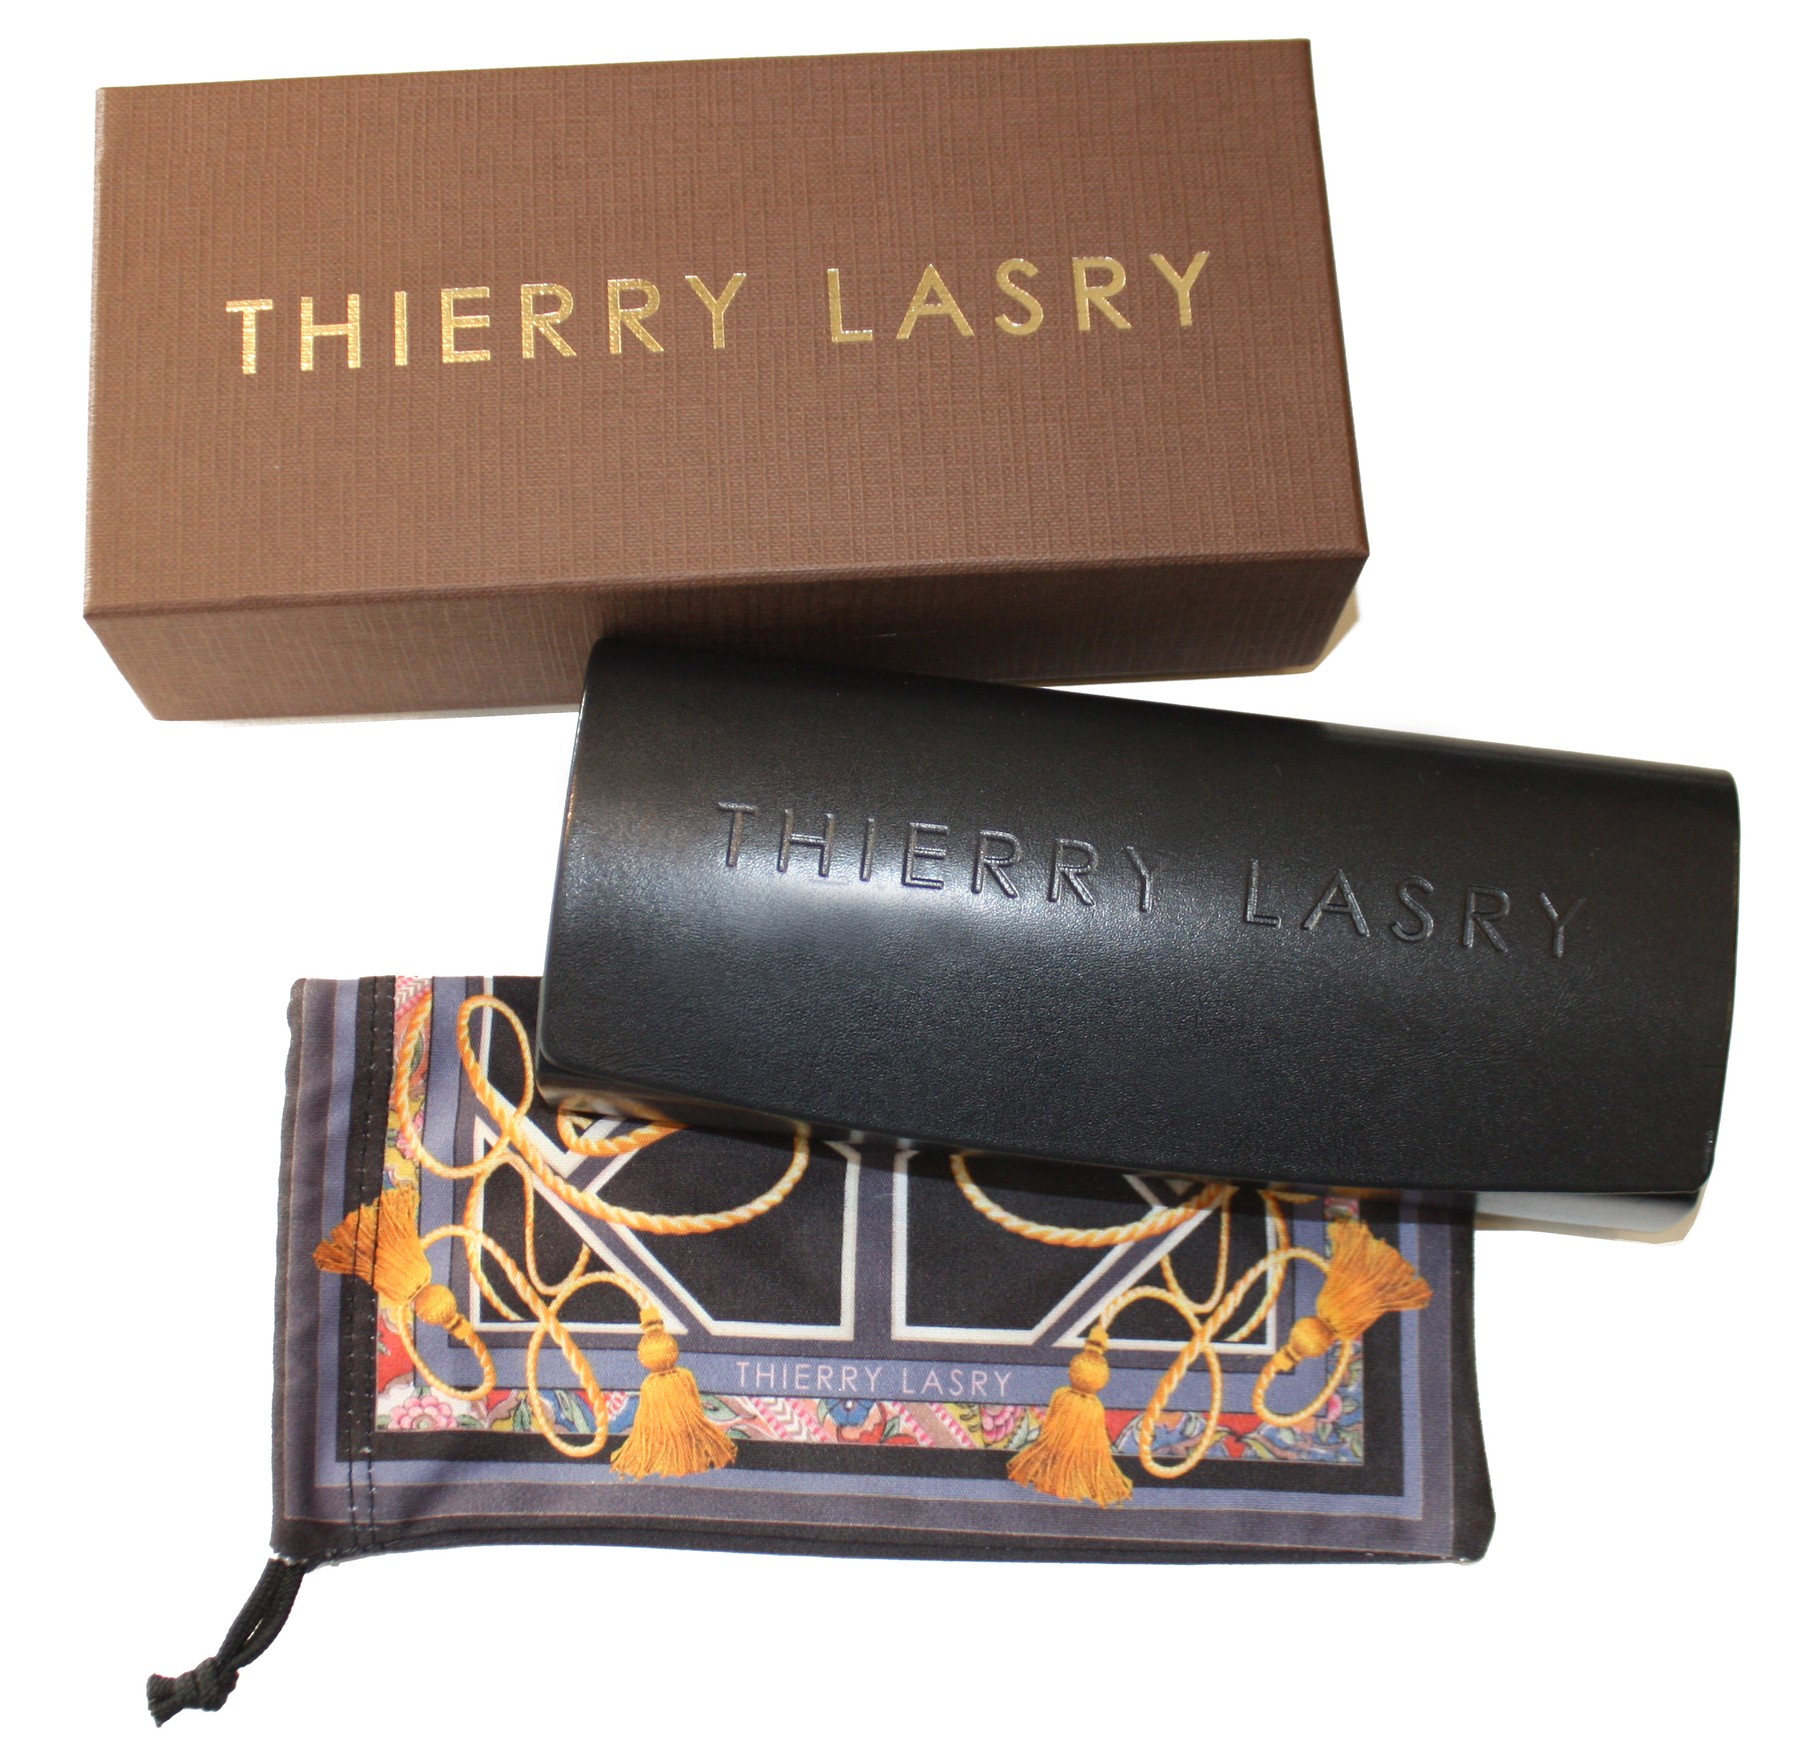 Thierry Lasry SNOBBY - 509